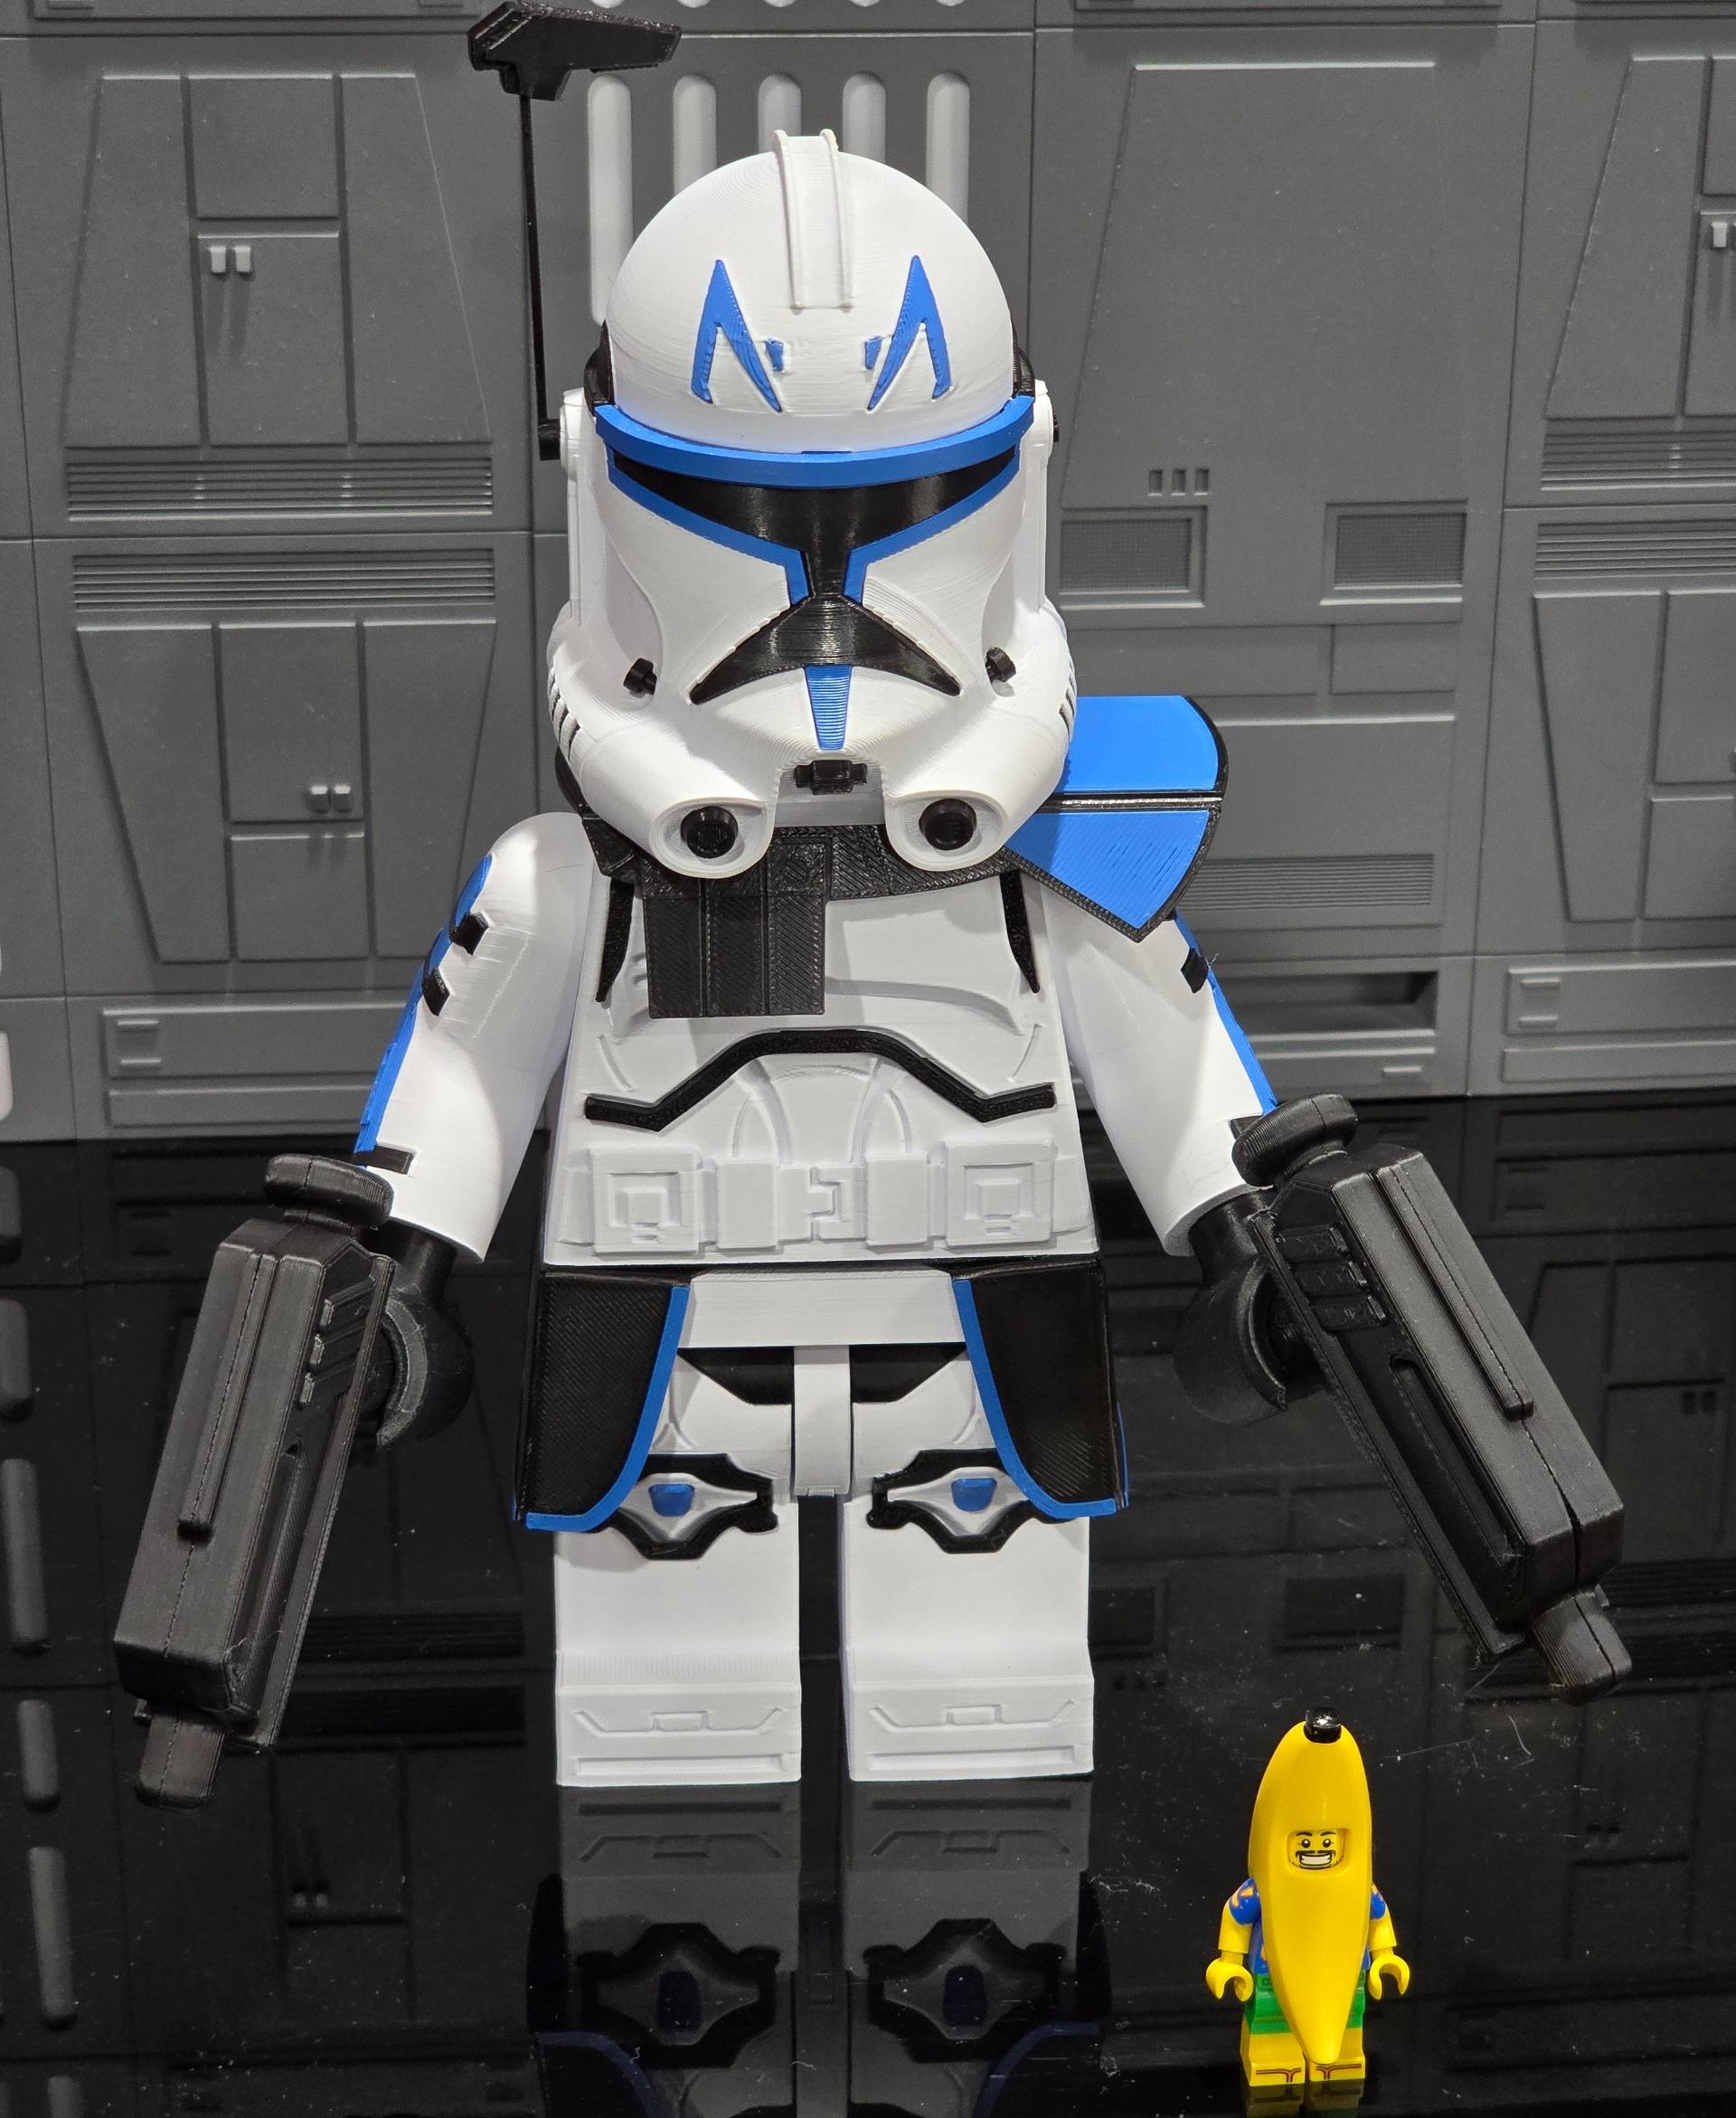 Captain Rex (9 inch brick figure, NO MMU/AMS, NO supports, NO glue) - "Yes, I know both Crunch and Kirk. All the captains know each other, but not all are Star Wars LEGO captains."  - 3d model